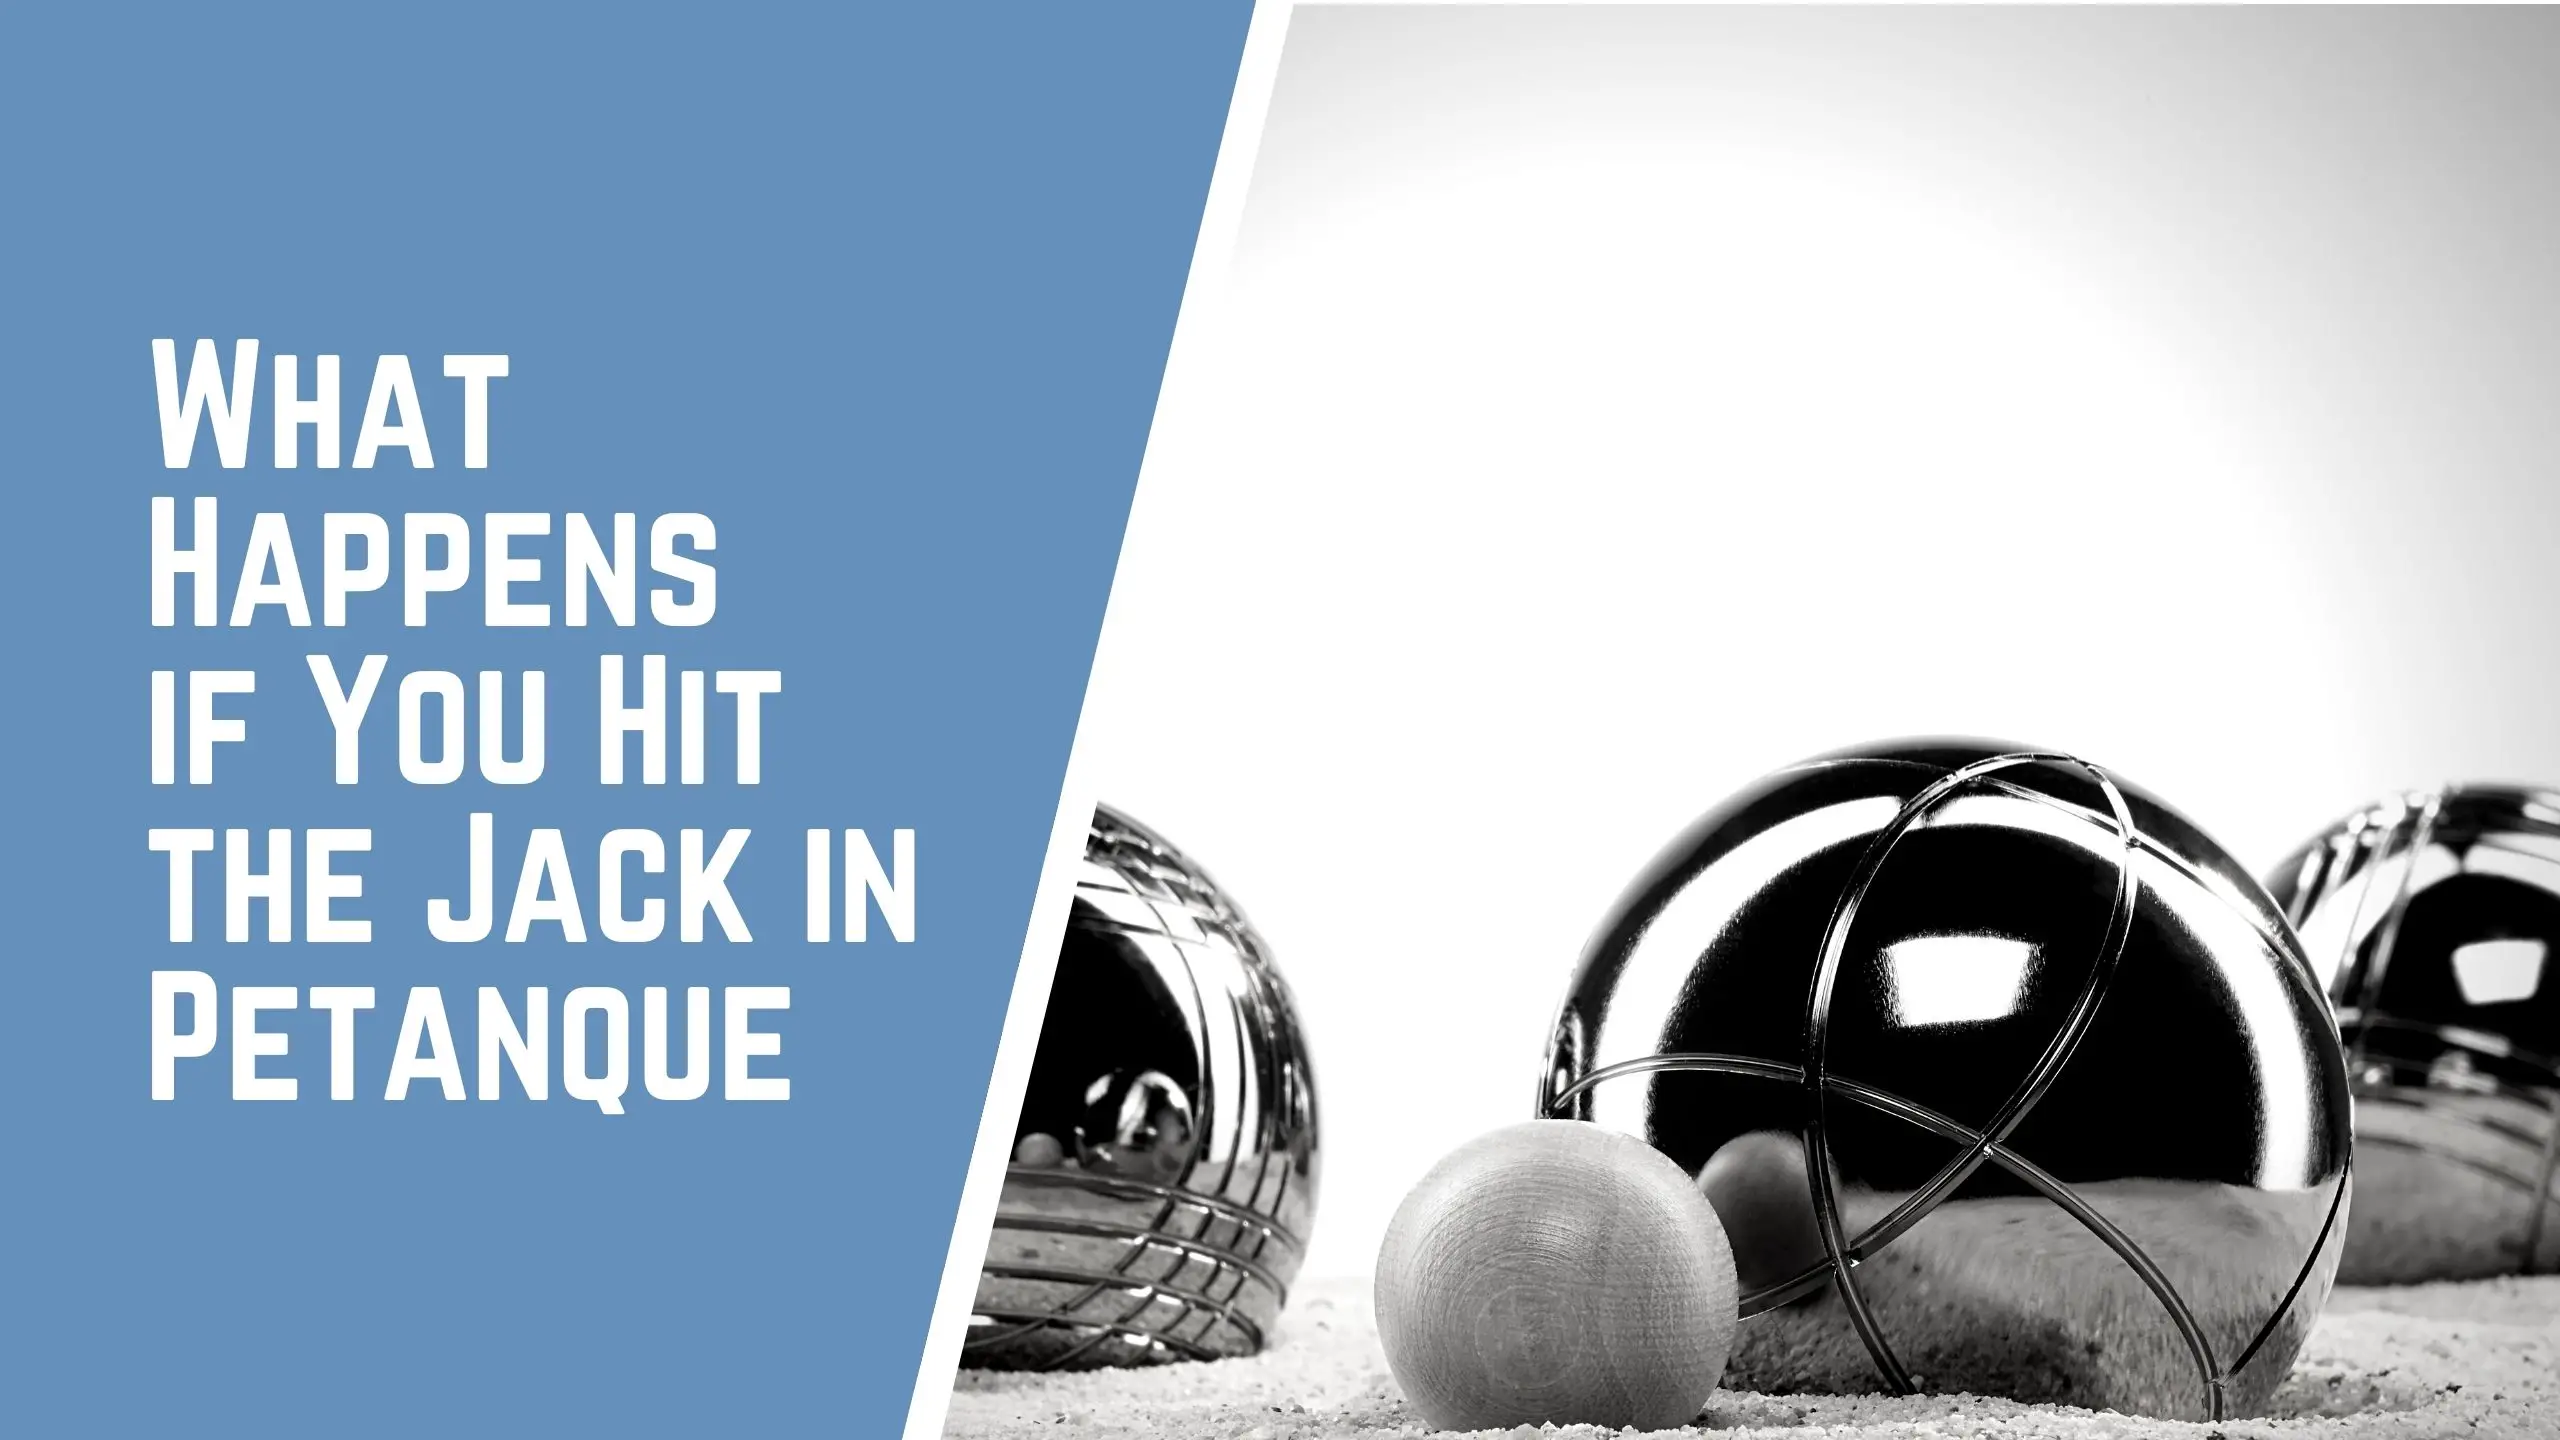 What Happens if You Hit the Jack in Petanque?